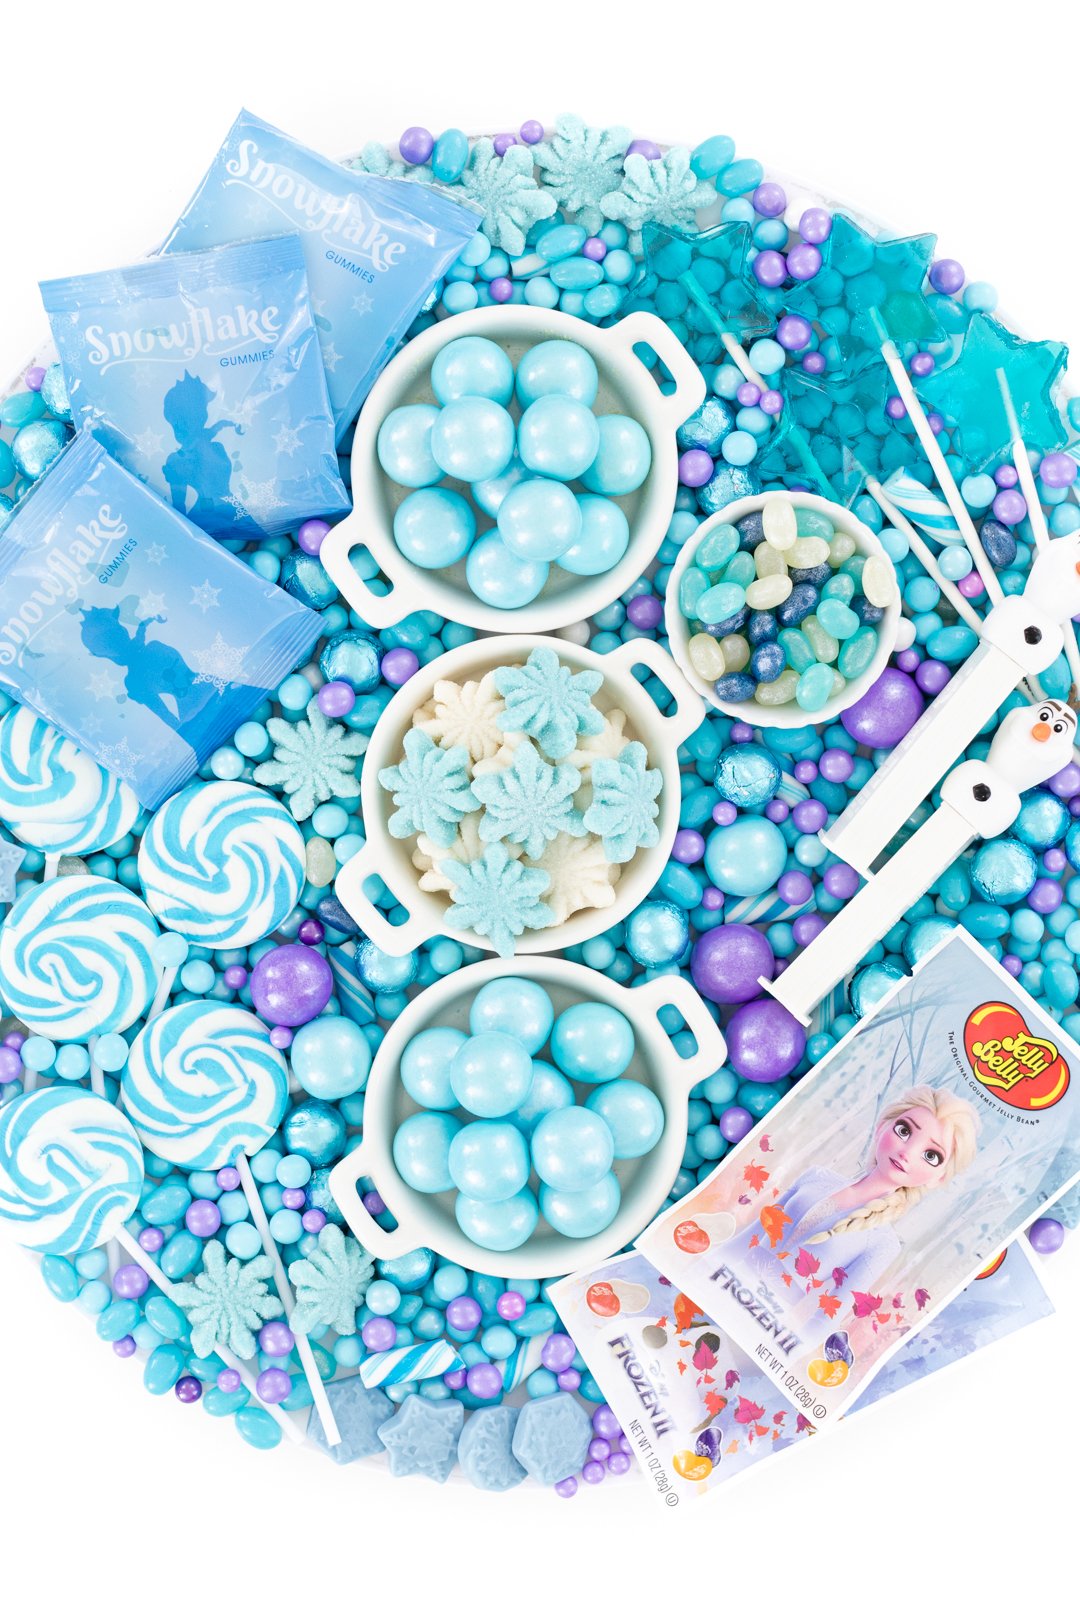 candy board with blue gumballs, snowflake gummy candies, swirl lollipops and olaf pez dispensers